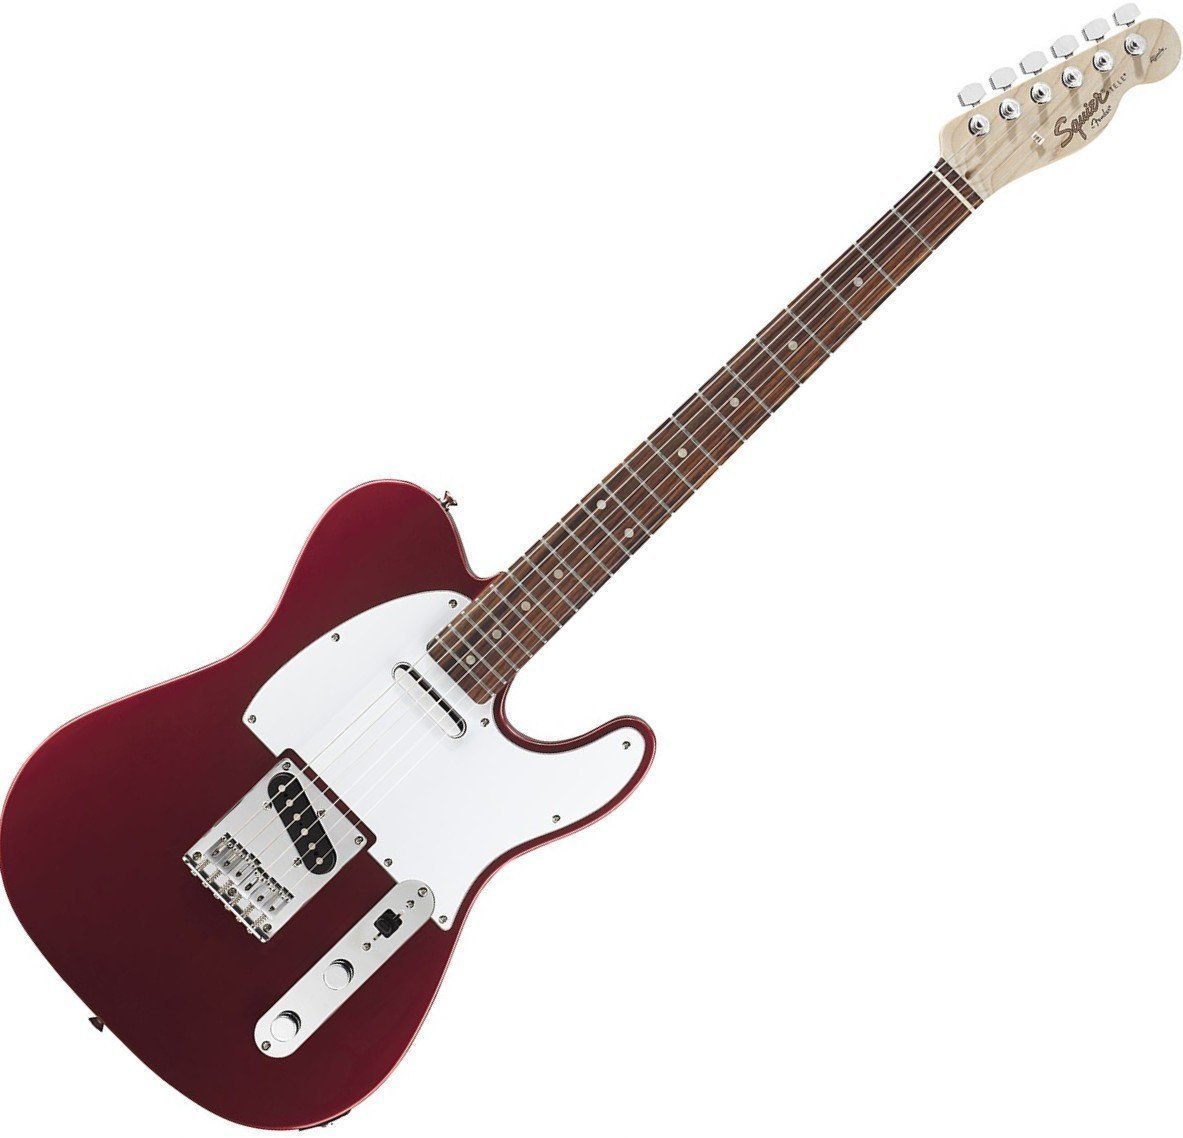 Electric guitar Fender Squier Affinity Telecaster Metallic Red